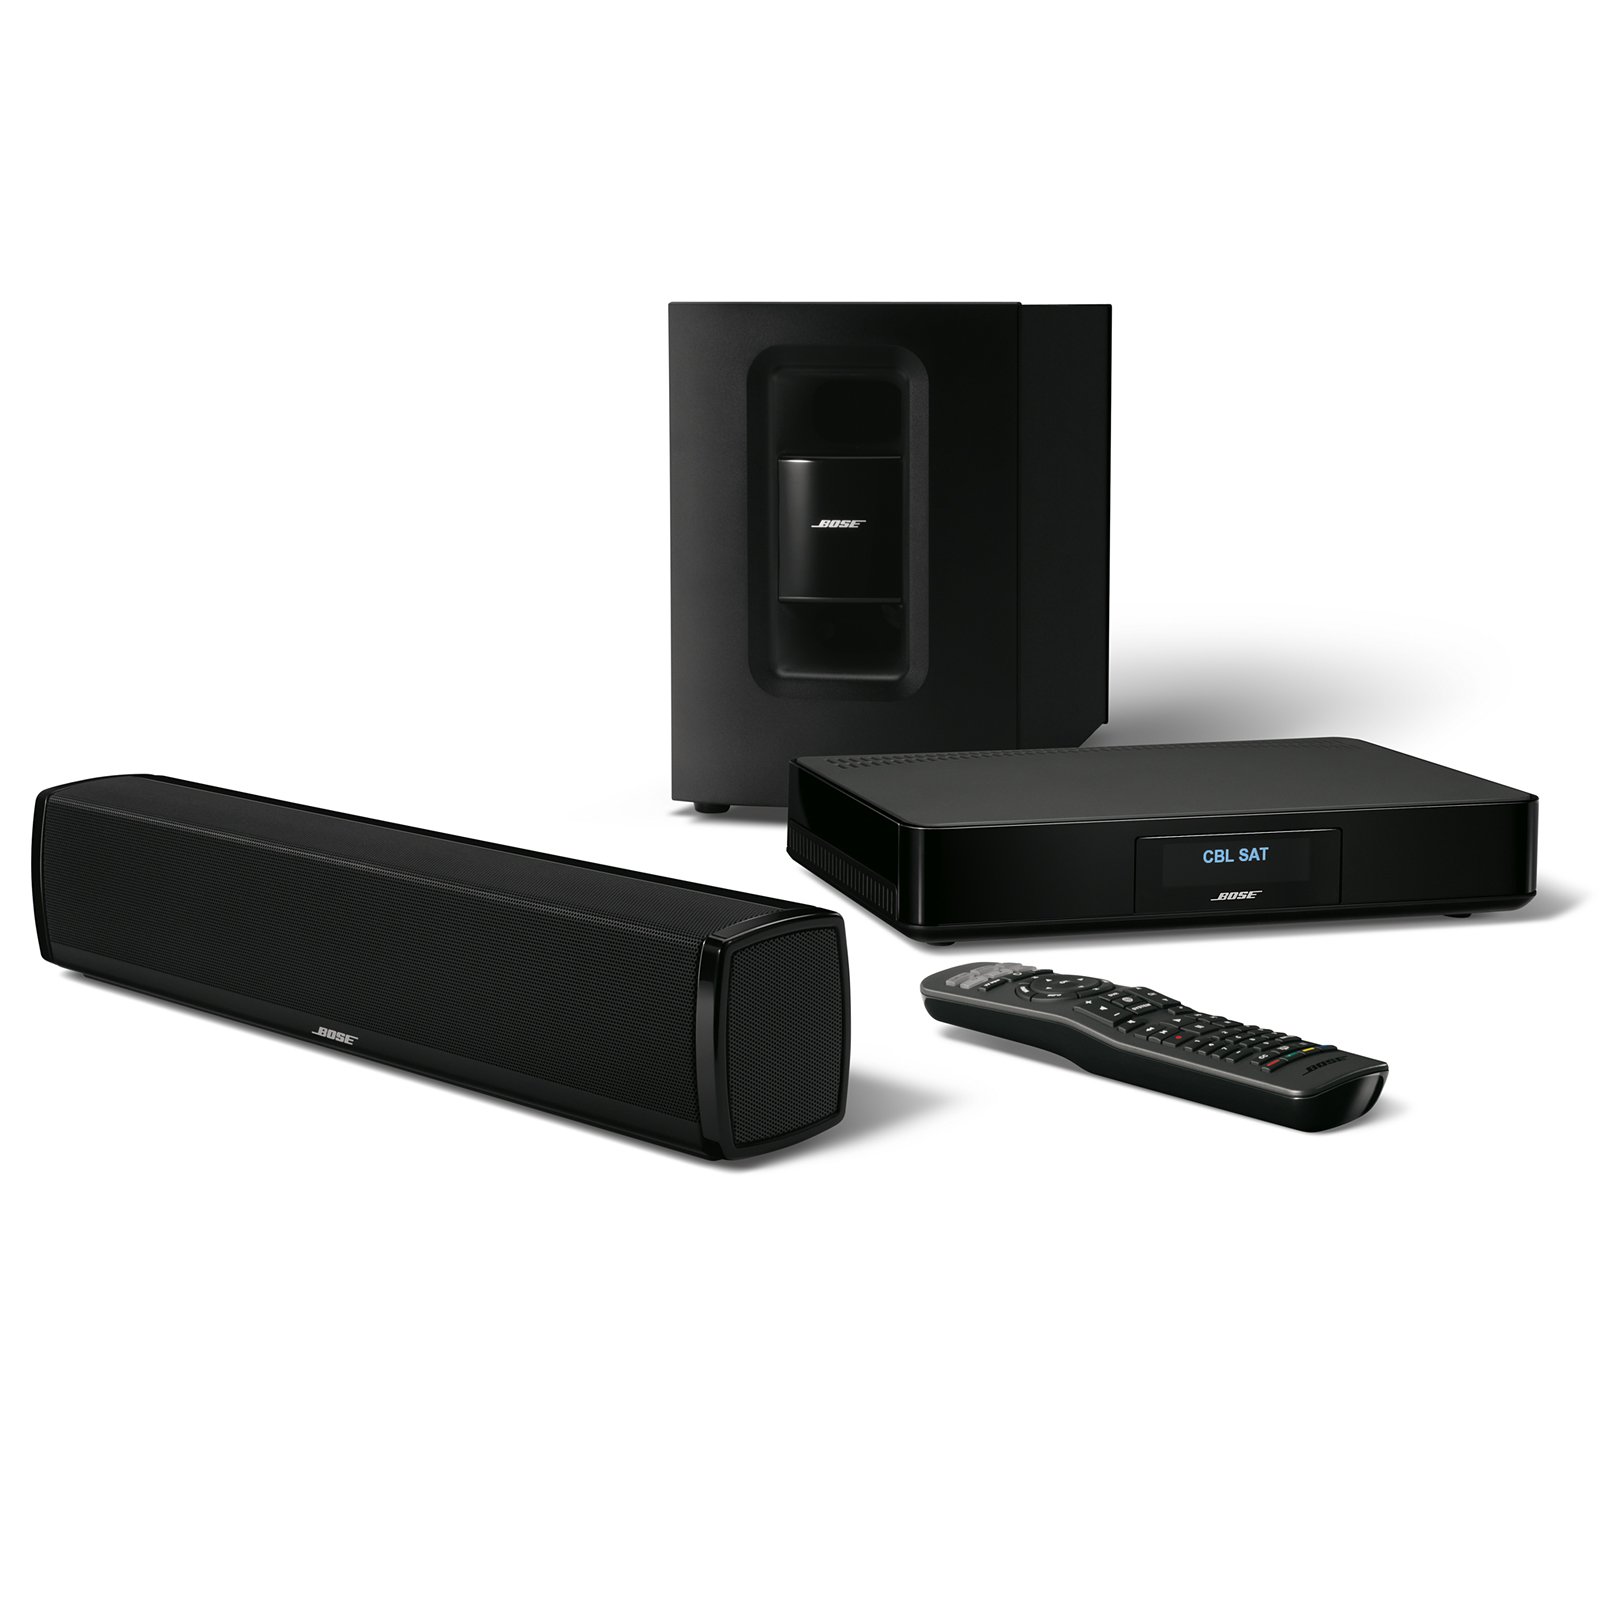 CineMate® 120 home theater system